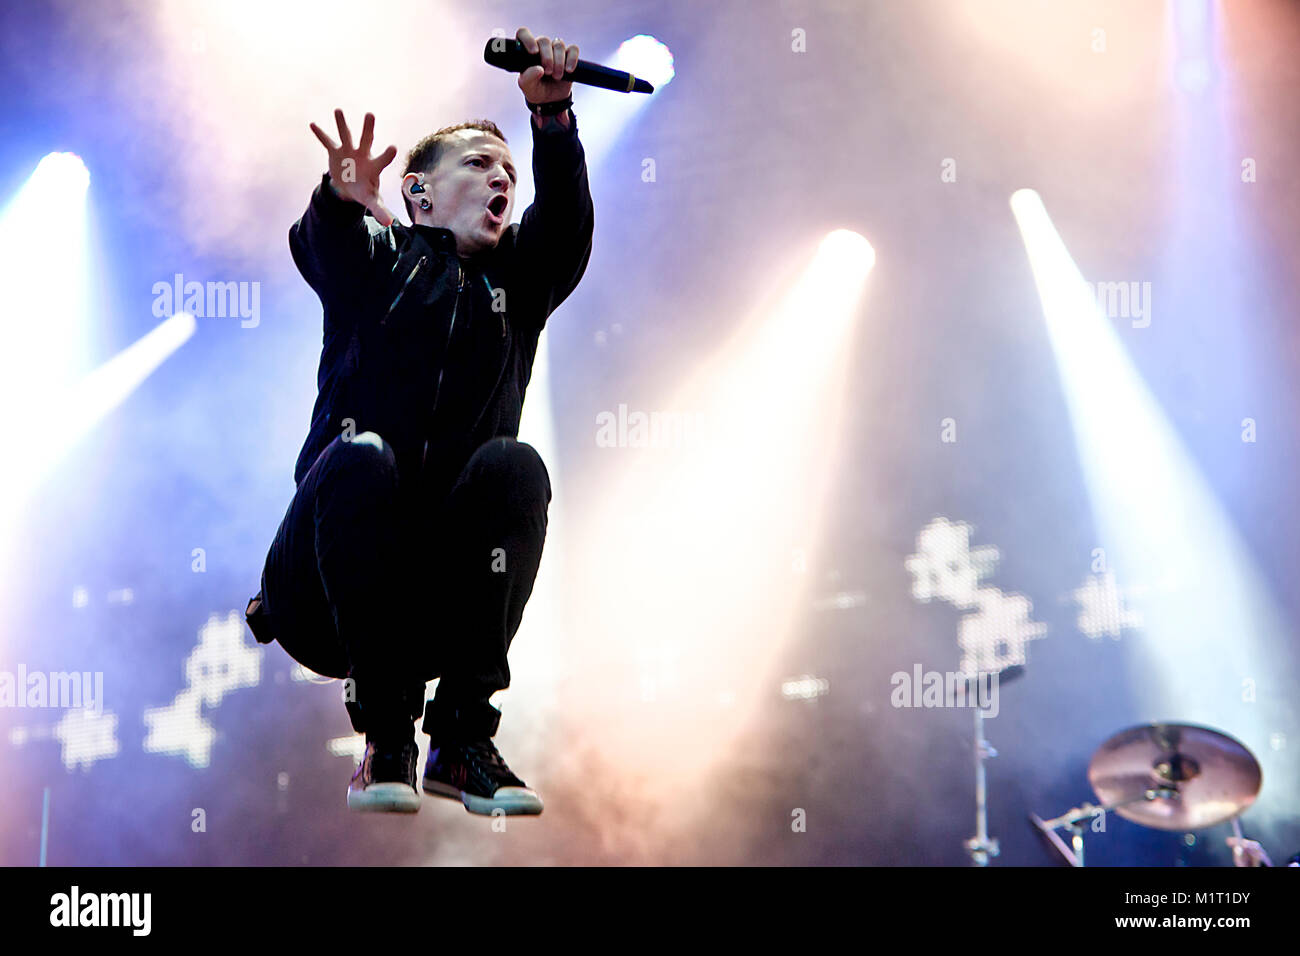 The American rock band Linkin Park performs a live concert at the Norwegian  music festival Hovefestivalen 2011. Here lead vocalist Chester Bennington  is seen live on stage. Norway, 28/06 2011 Stock Photo - Alamy